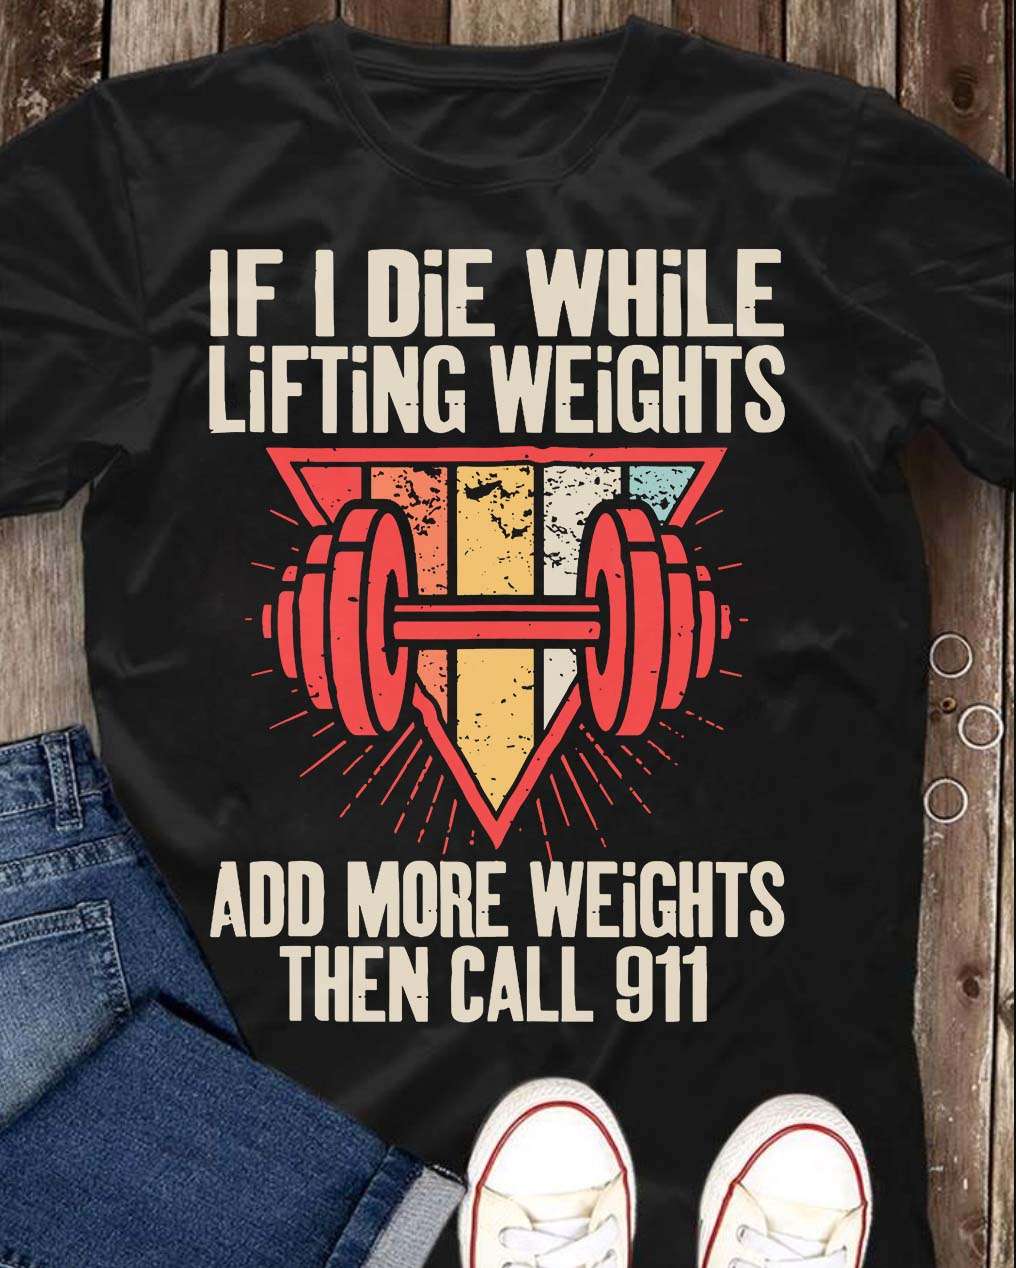 If i die while lifting weights add more weights then call 911